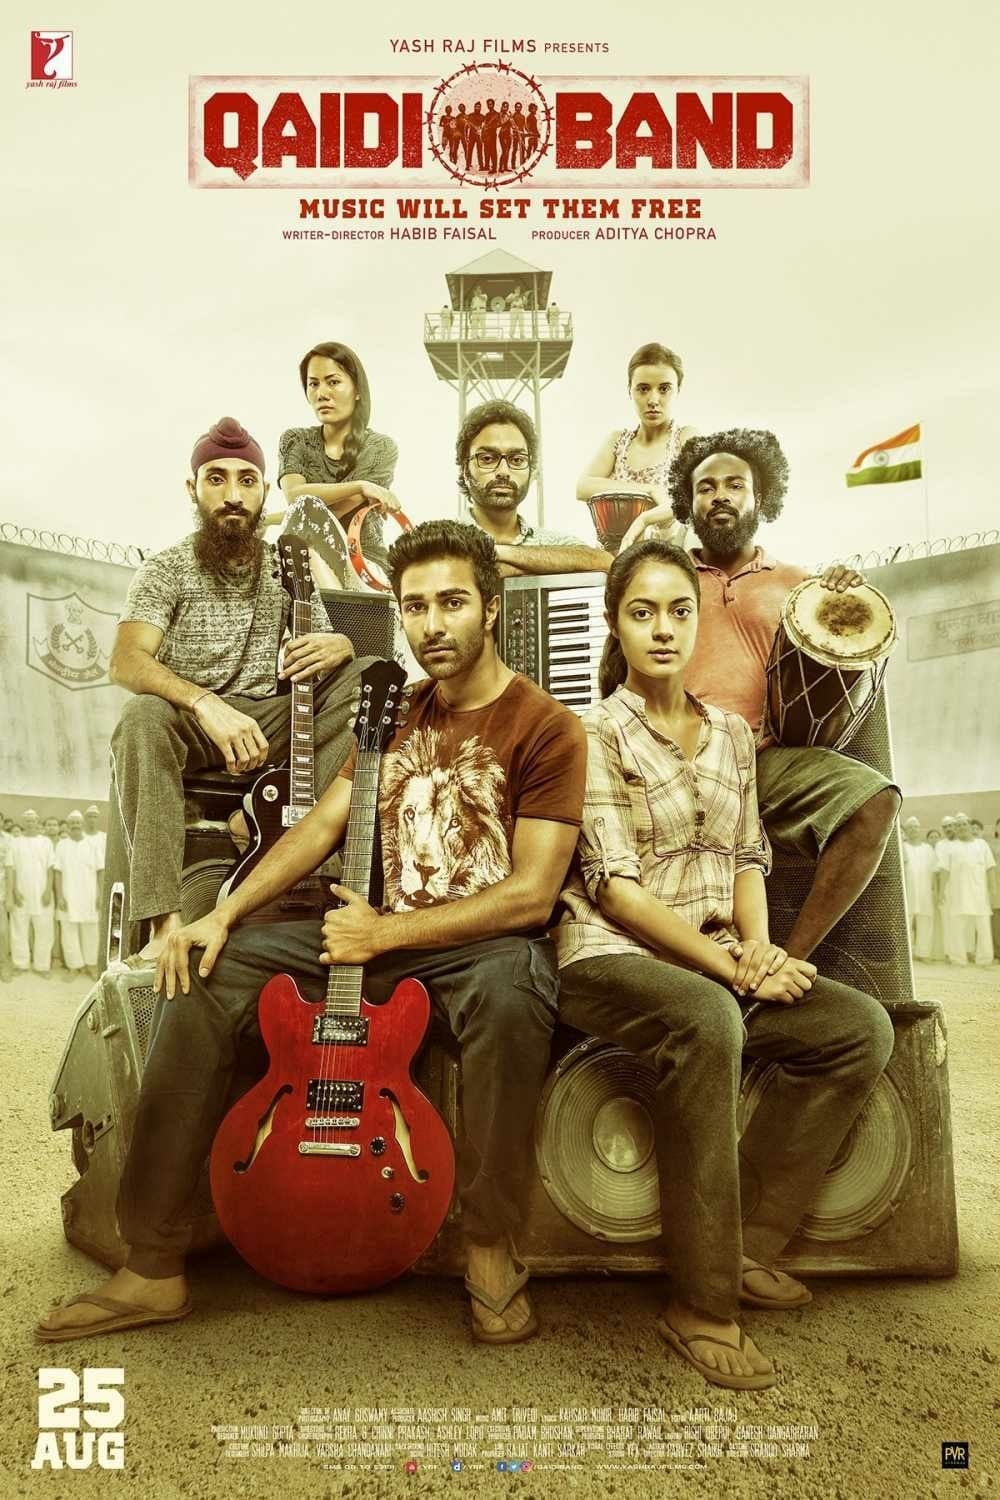 Poster for the movie "Qaidi Band"